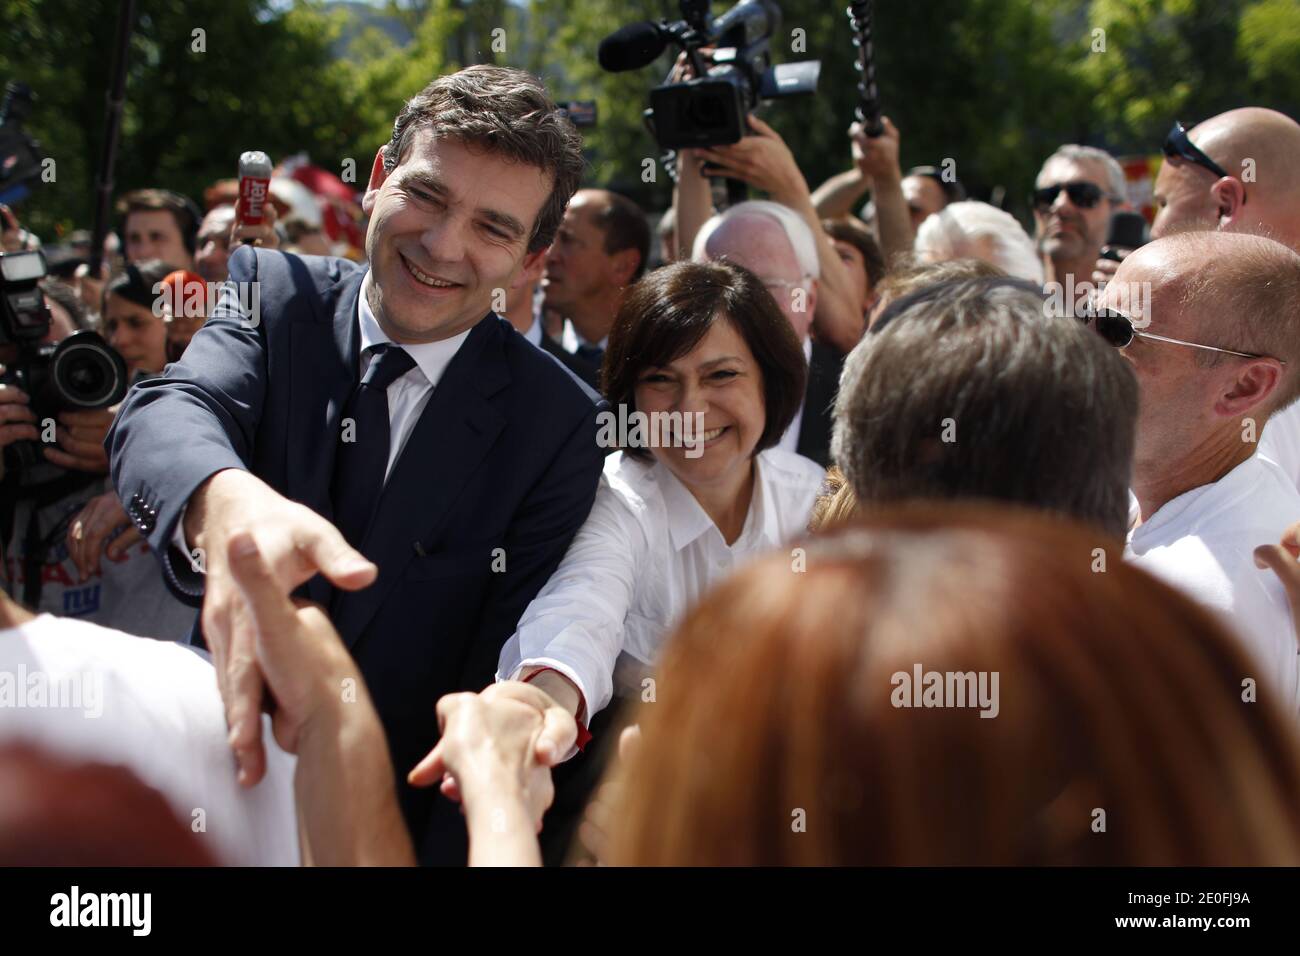 French Minister of Productive Recovery, Arnaud Montebourg alongside general councillor of Bouches-du-Rhone departement, Marie-Arlette Carlotti during his visit to Marseille, southern France on May 25, 2012. Photo by Sebastien Boue/ABACAPRESS.COM Stock Photo